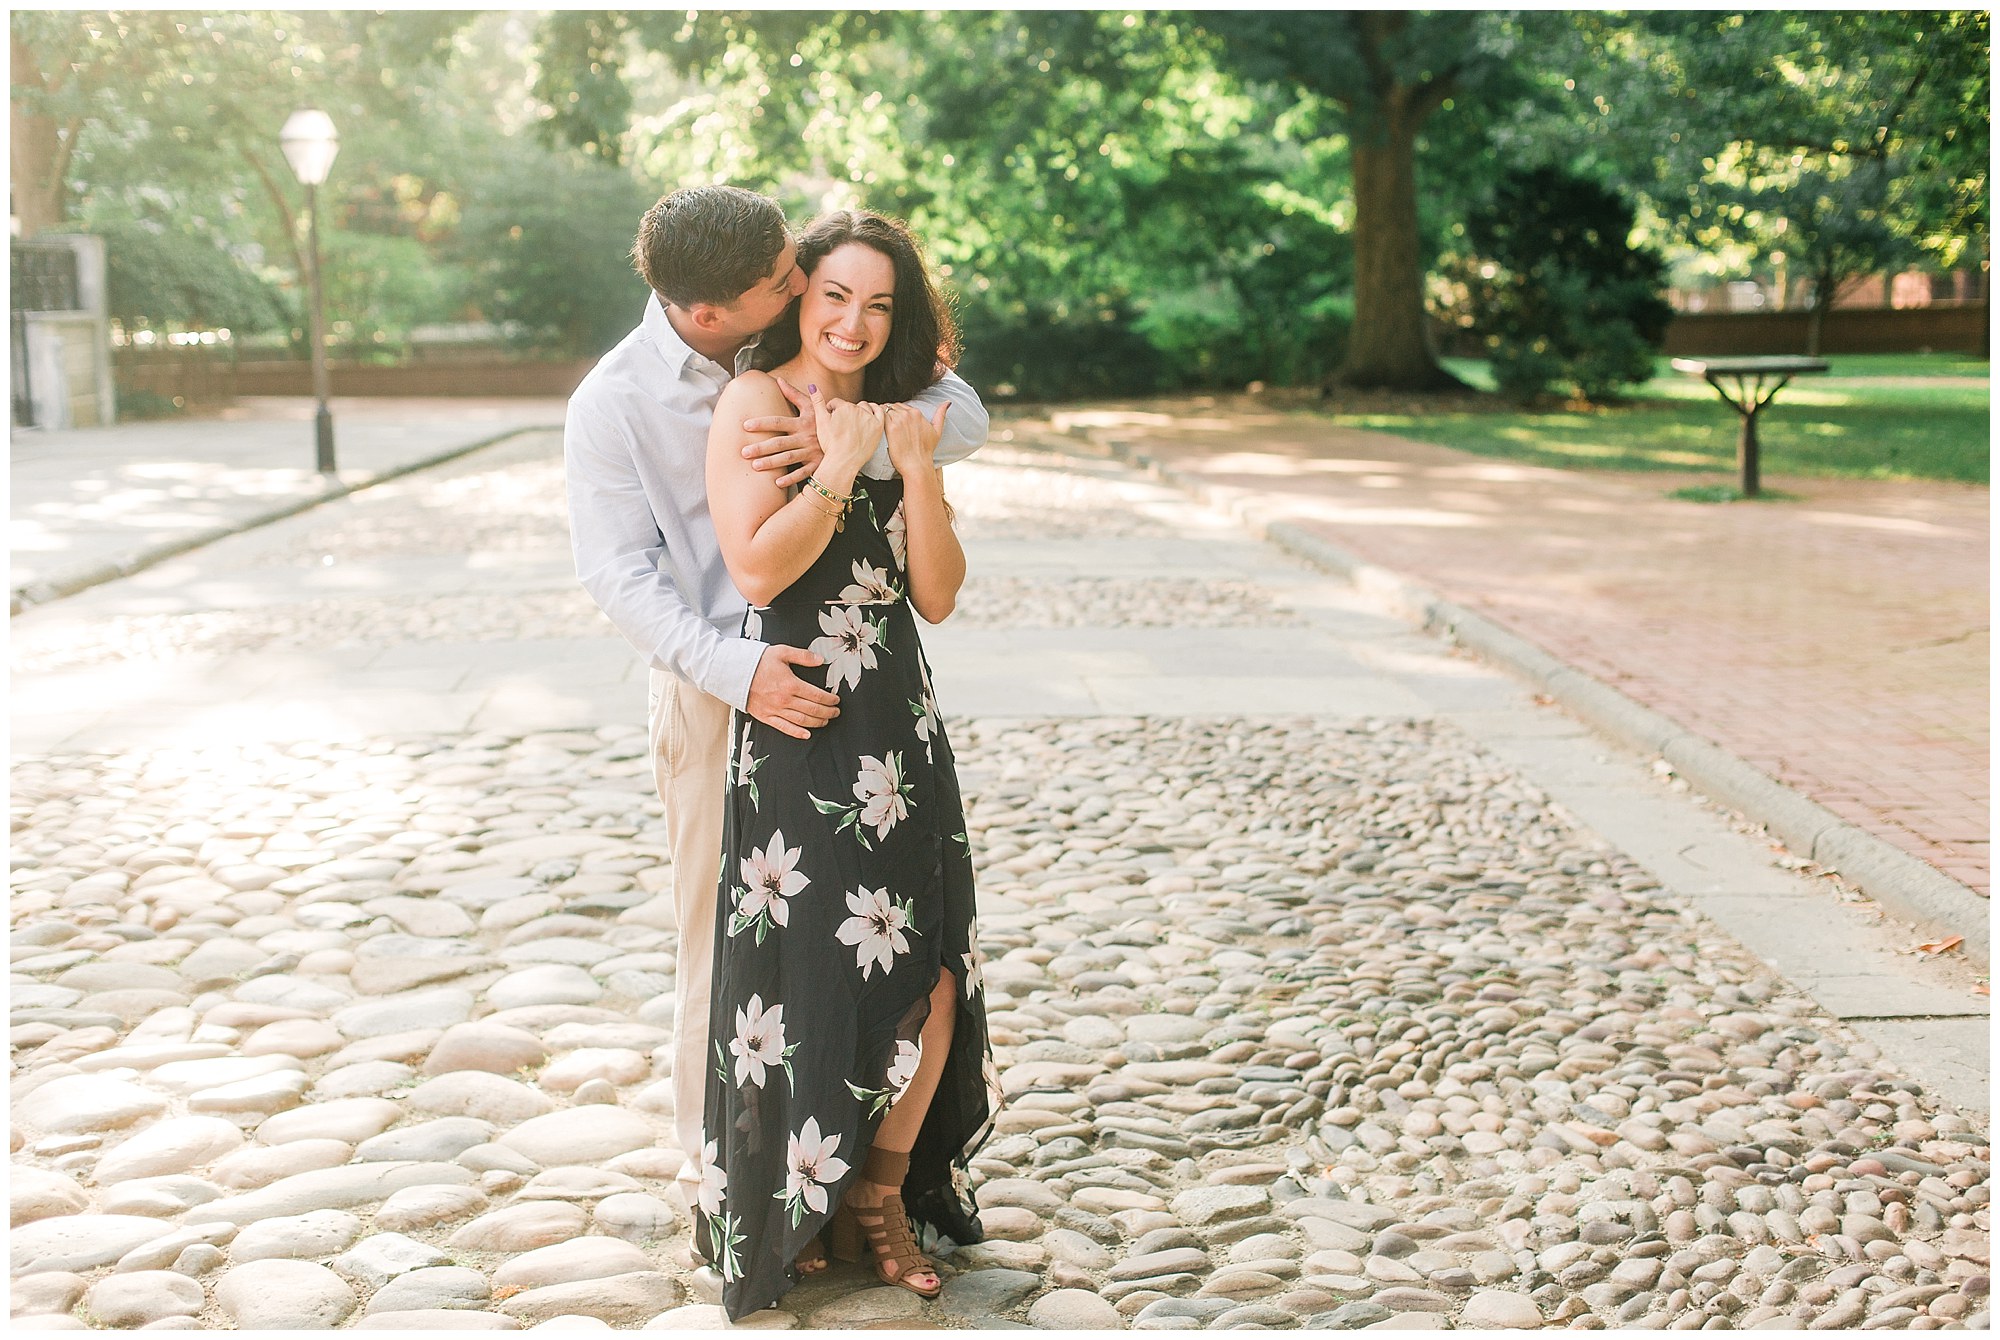 Rob & Sarah's Chic Engagement Session in Old City, Philadelphia Photos